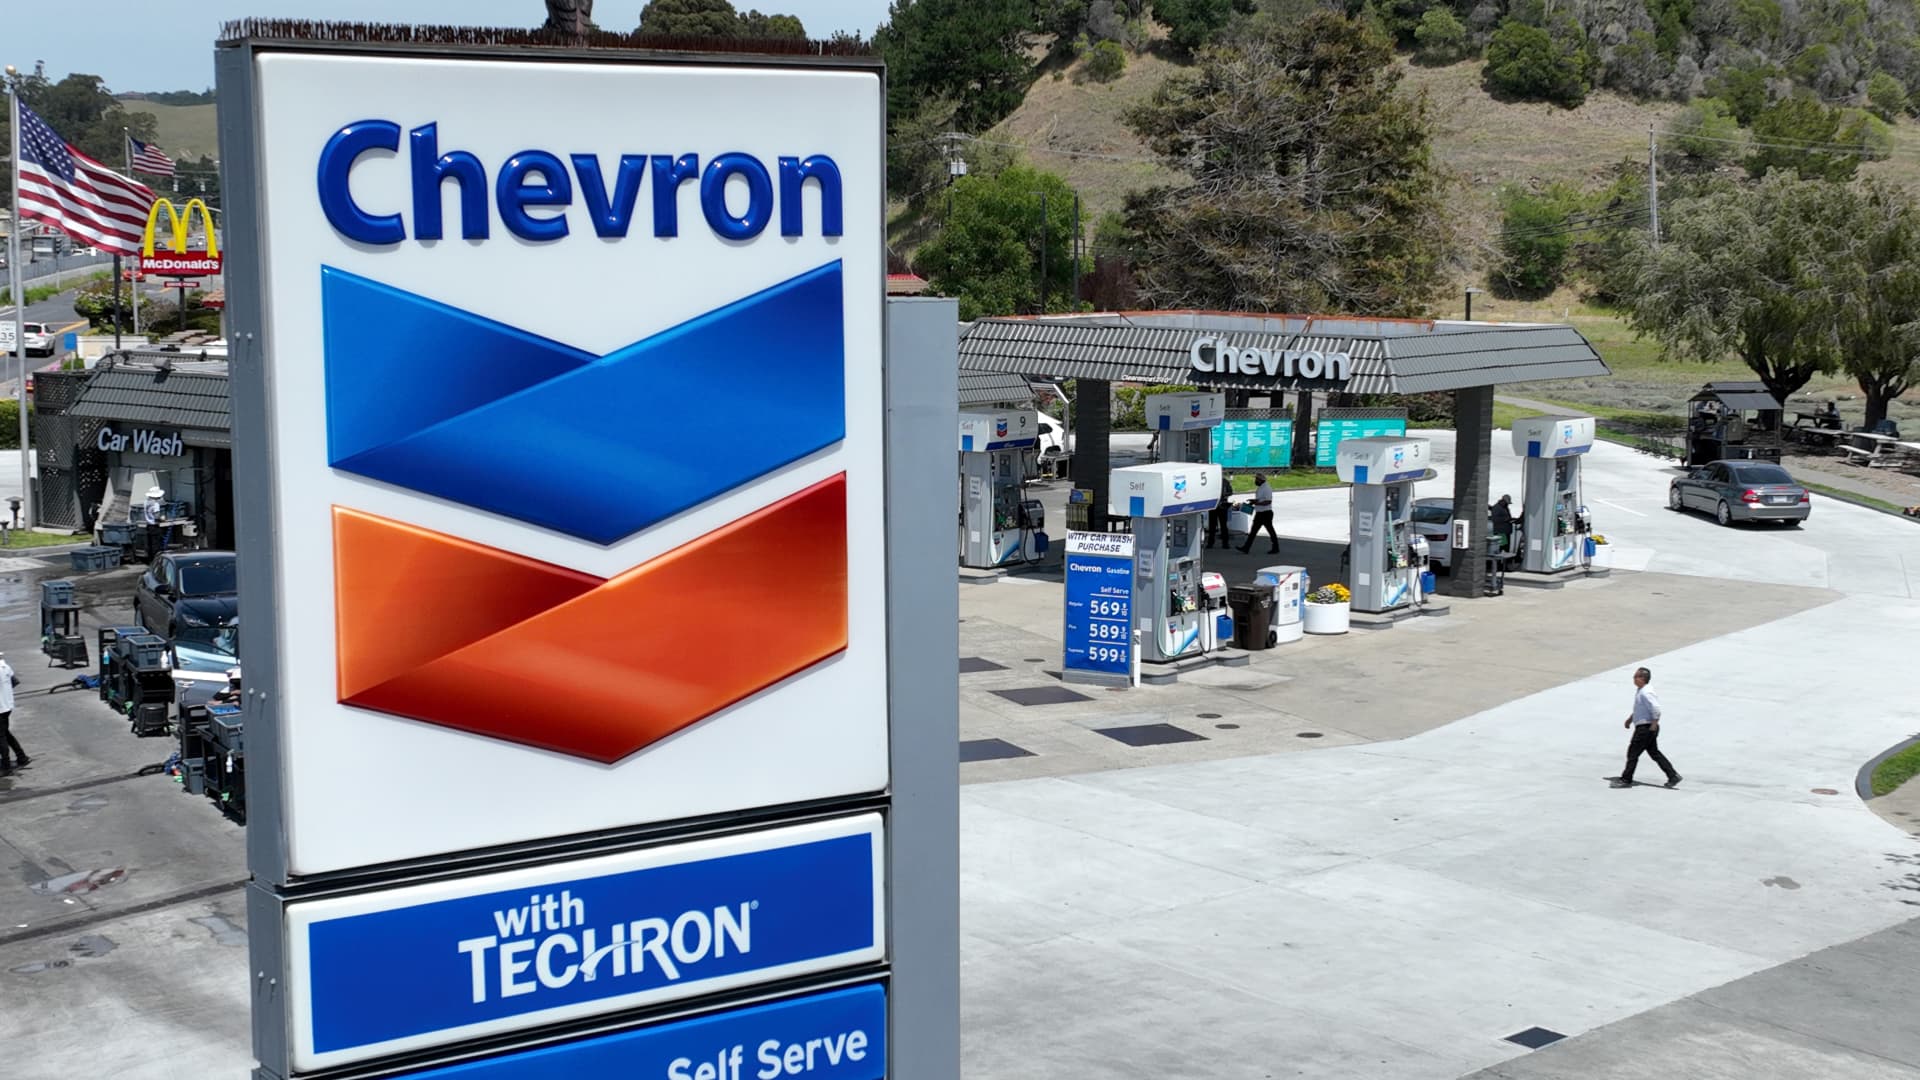 Chevron last month reported its second-highest quarterly profit ever.